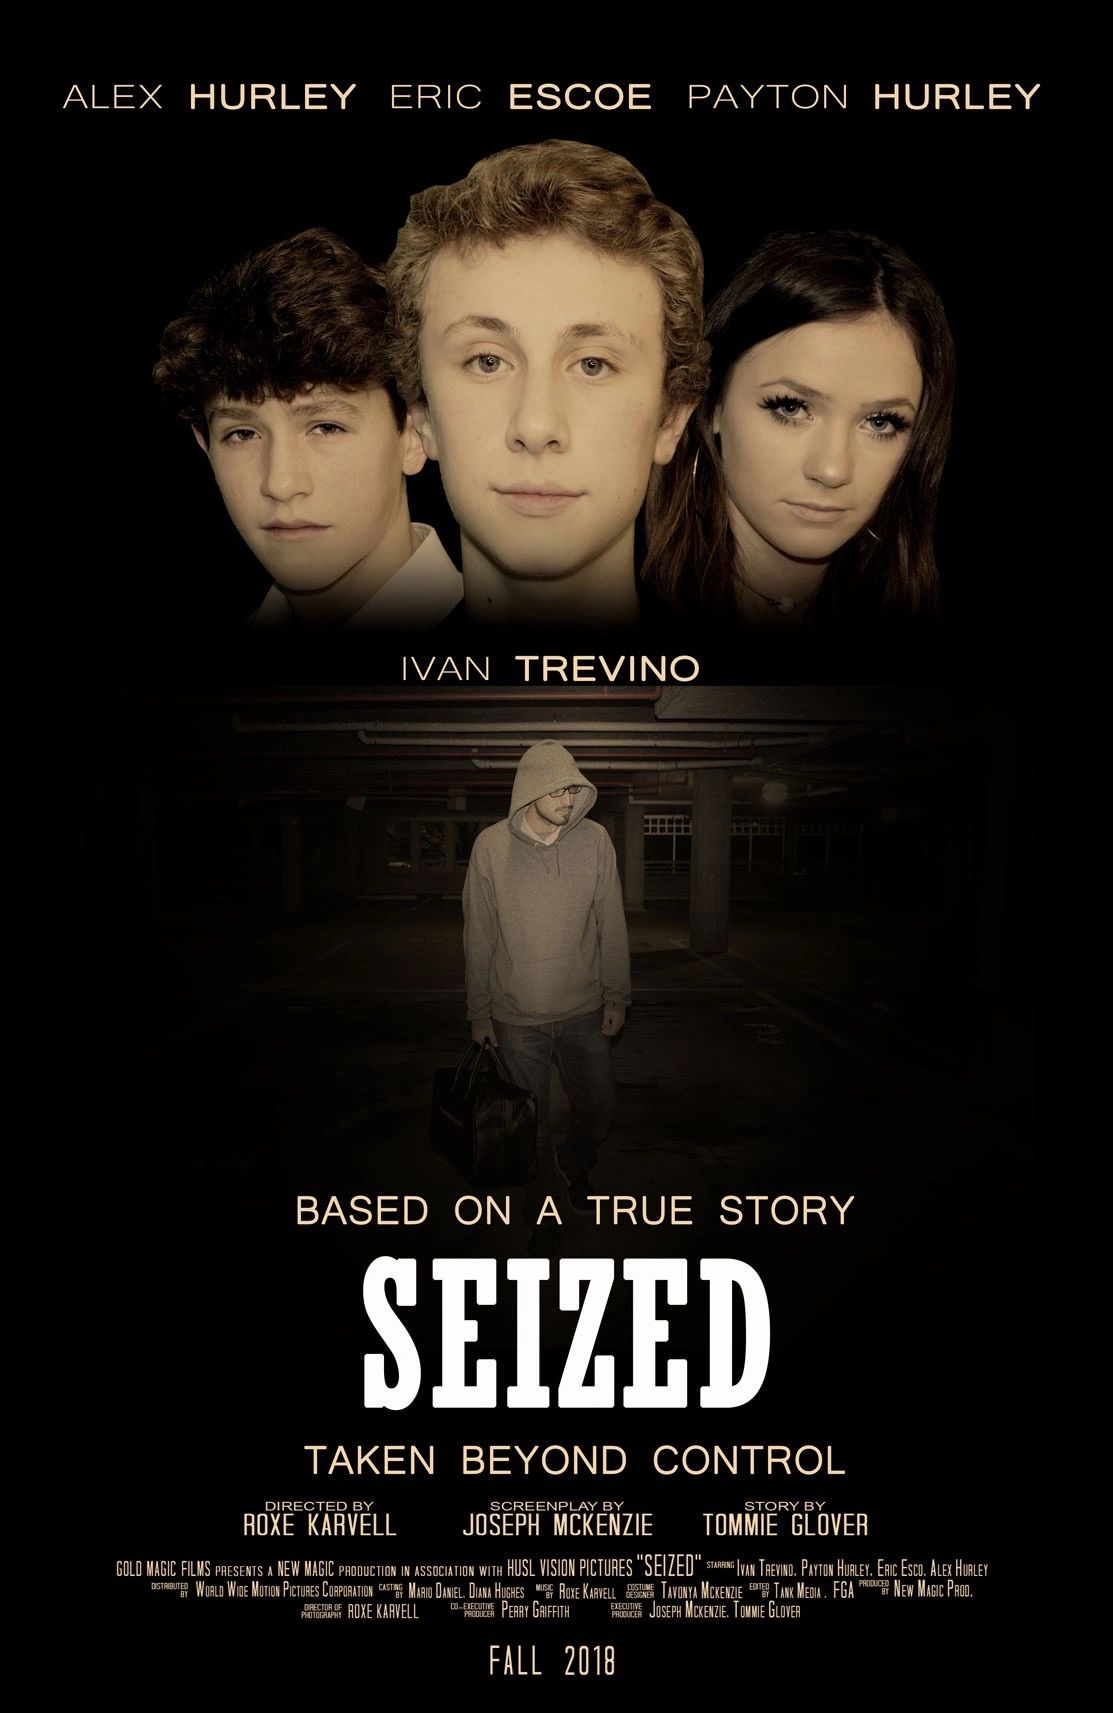 SEIZED Mover poster cover
Property of New Magic Productions, LLC 2020